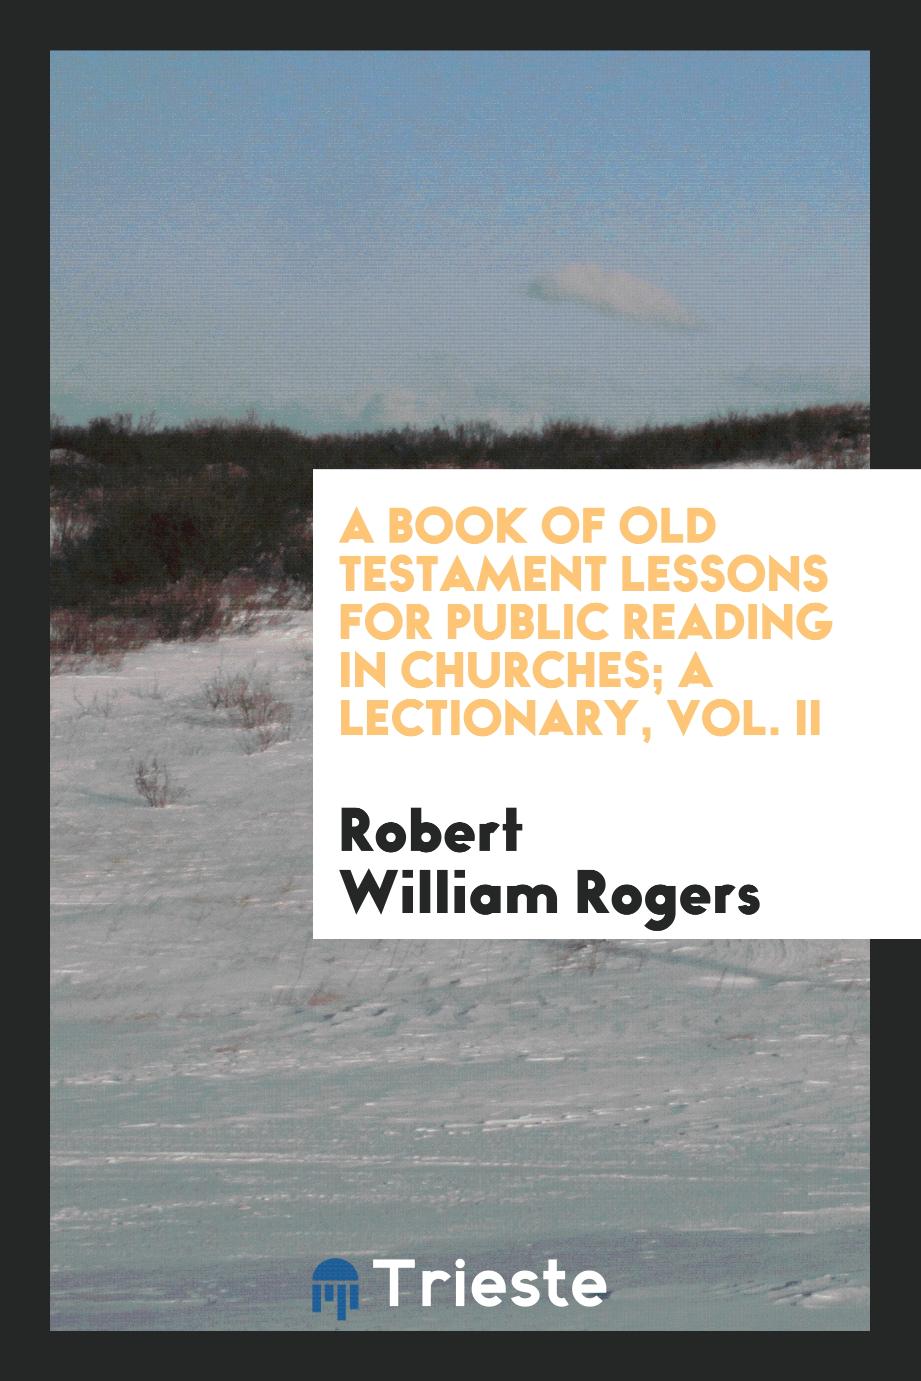 A book of Old Testament lessons for public reading in churches; a lectionary, Vol. II